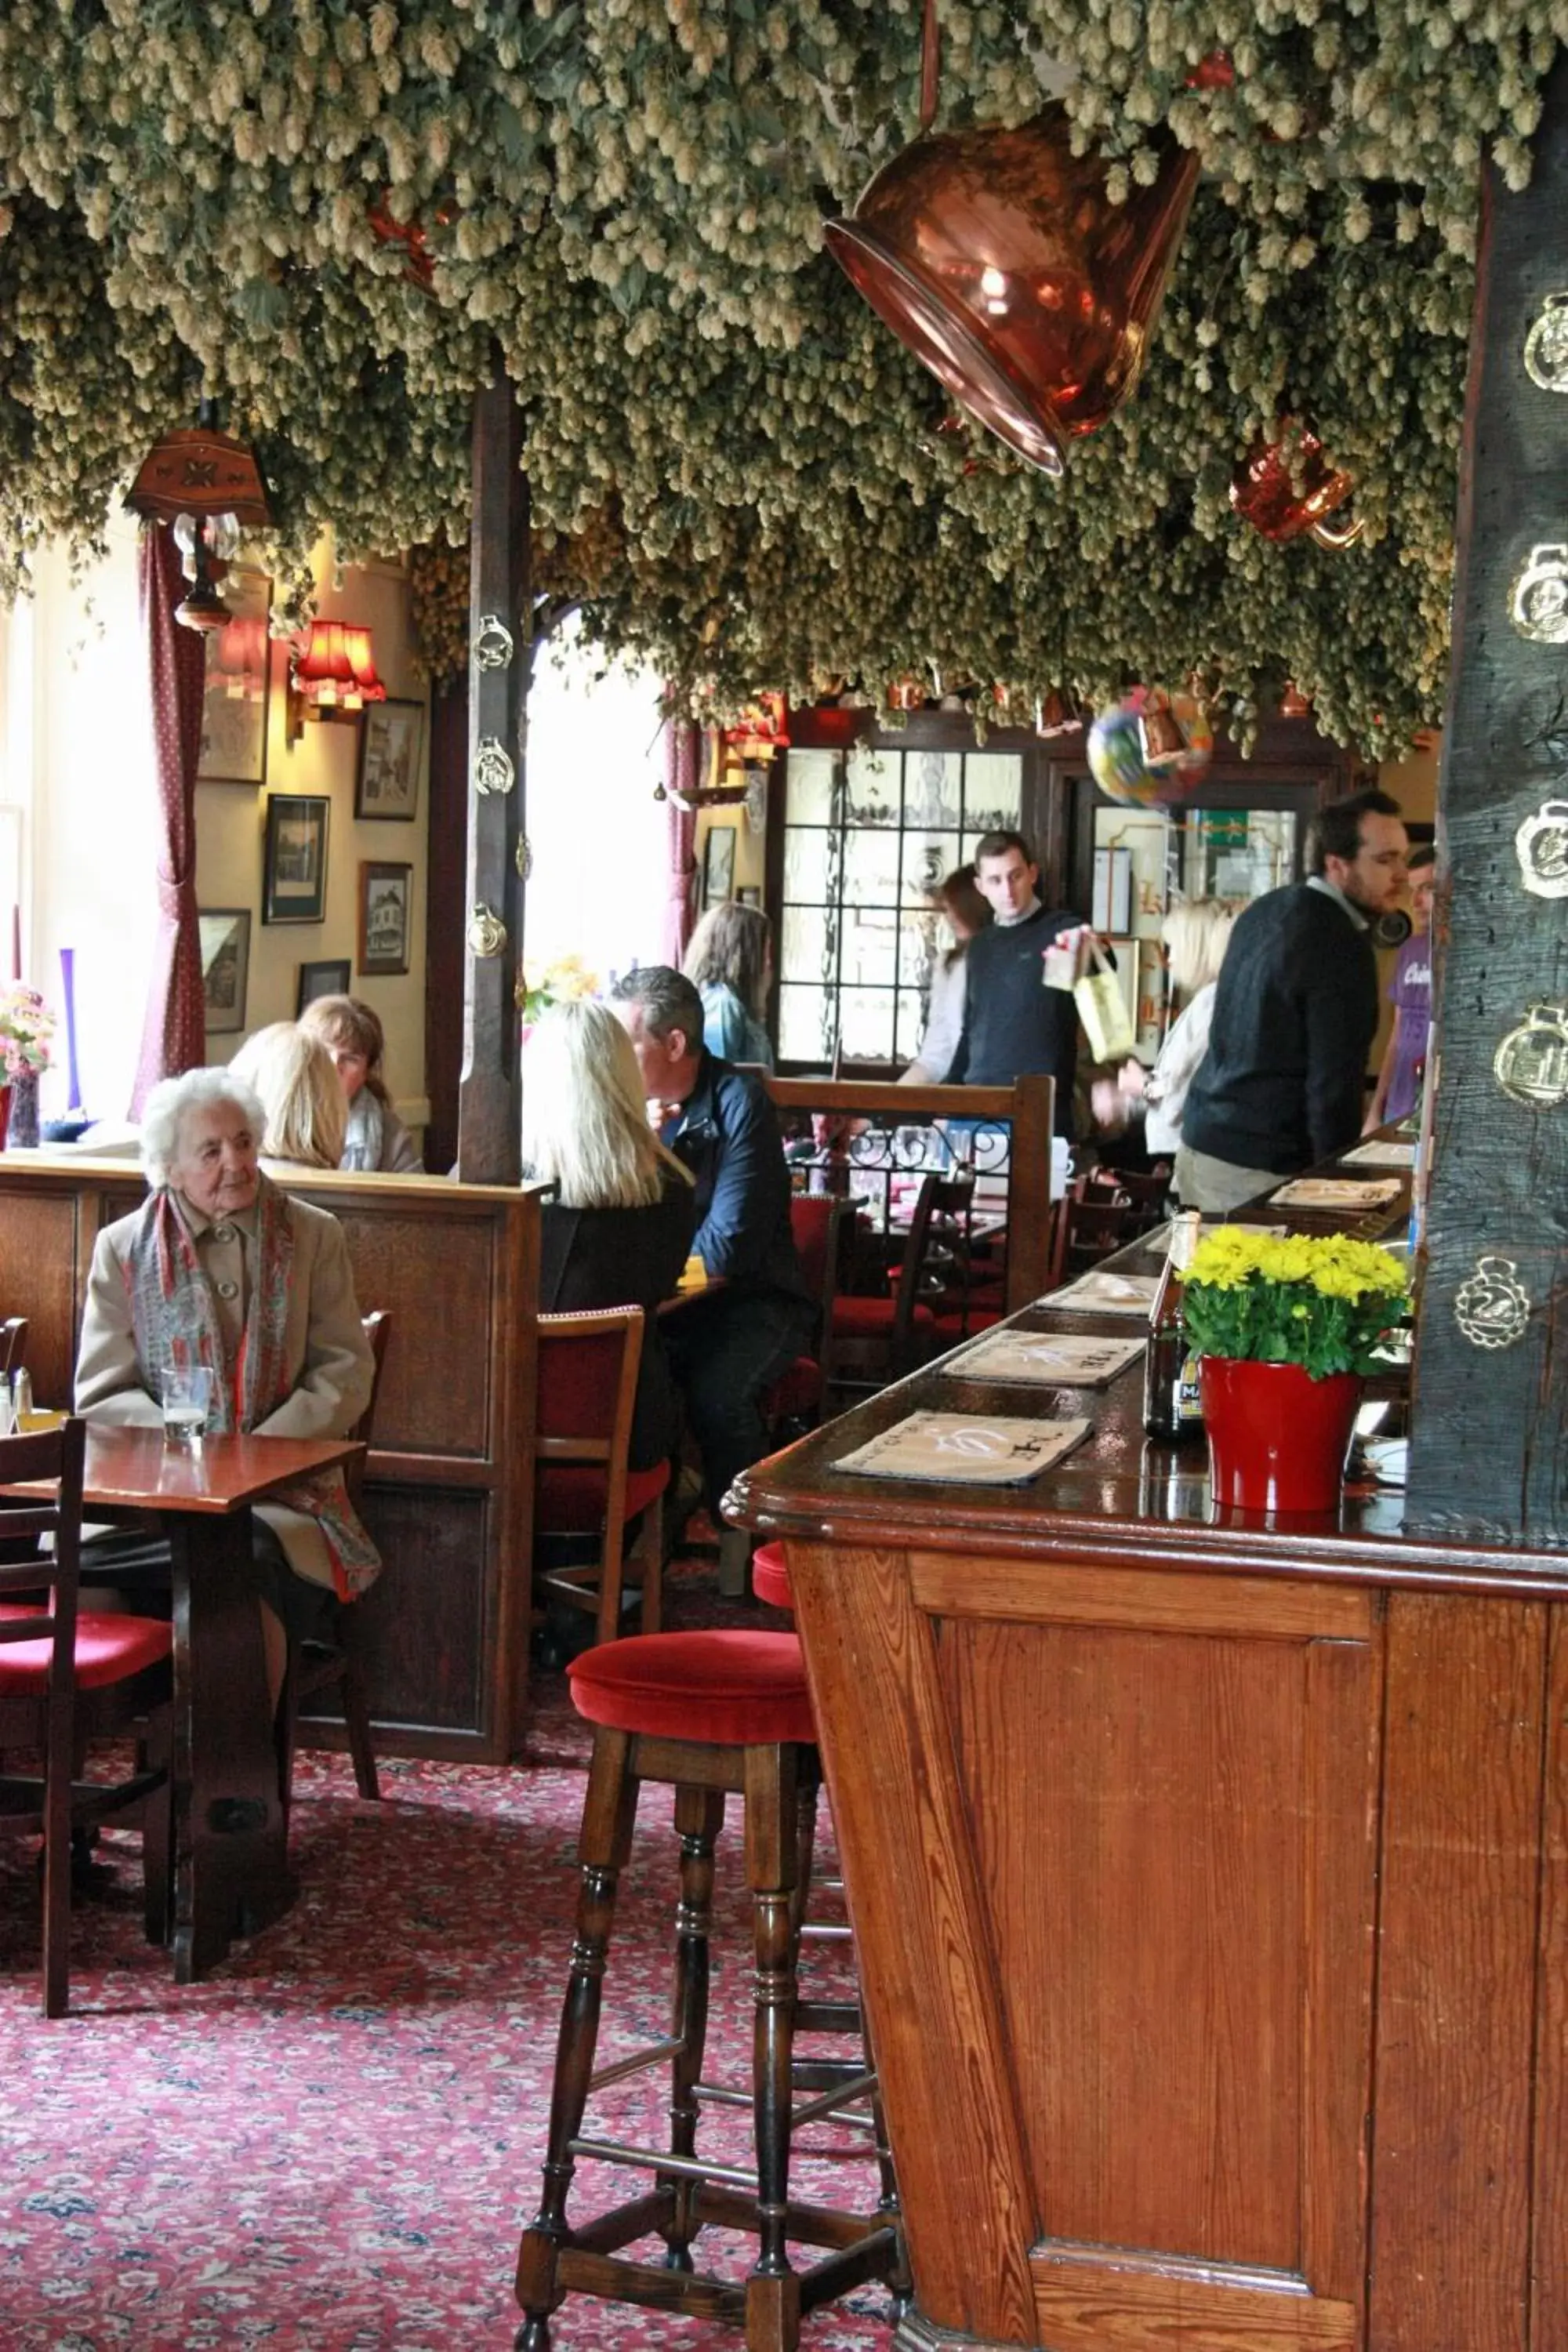 Restaurant/places to eat in Kings Arms Hotel